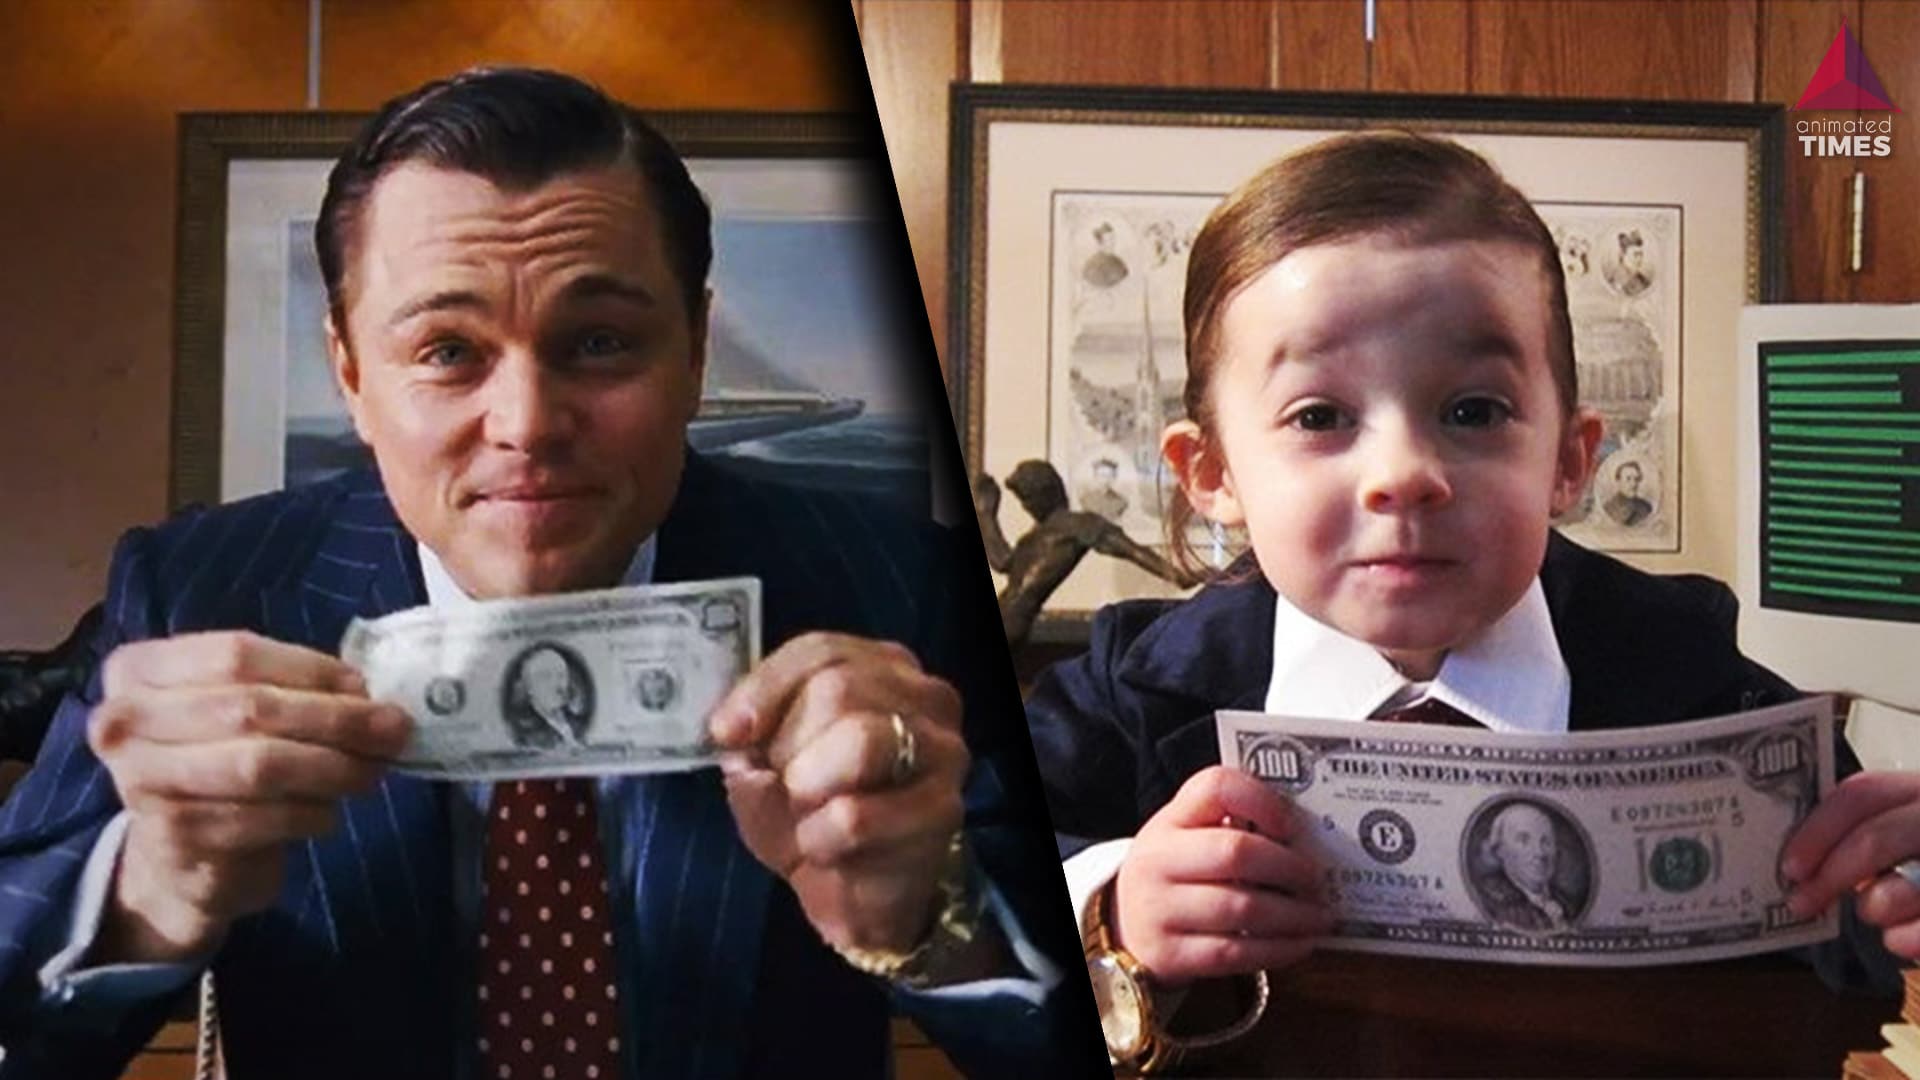 Kids Dressed Up As Actors In Iconic Movie Scenes Will Leave You In Splits